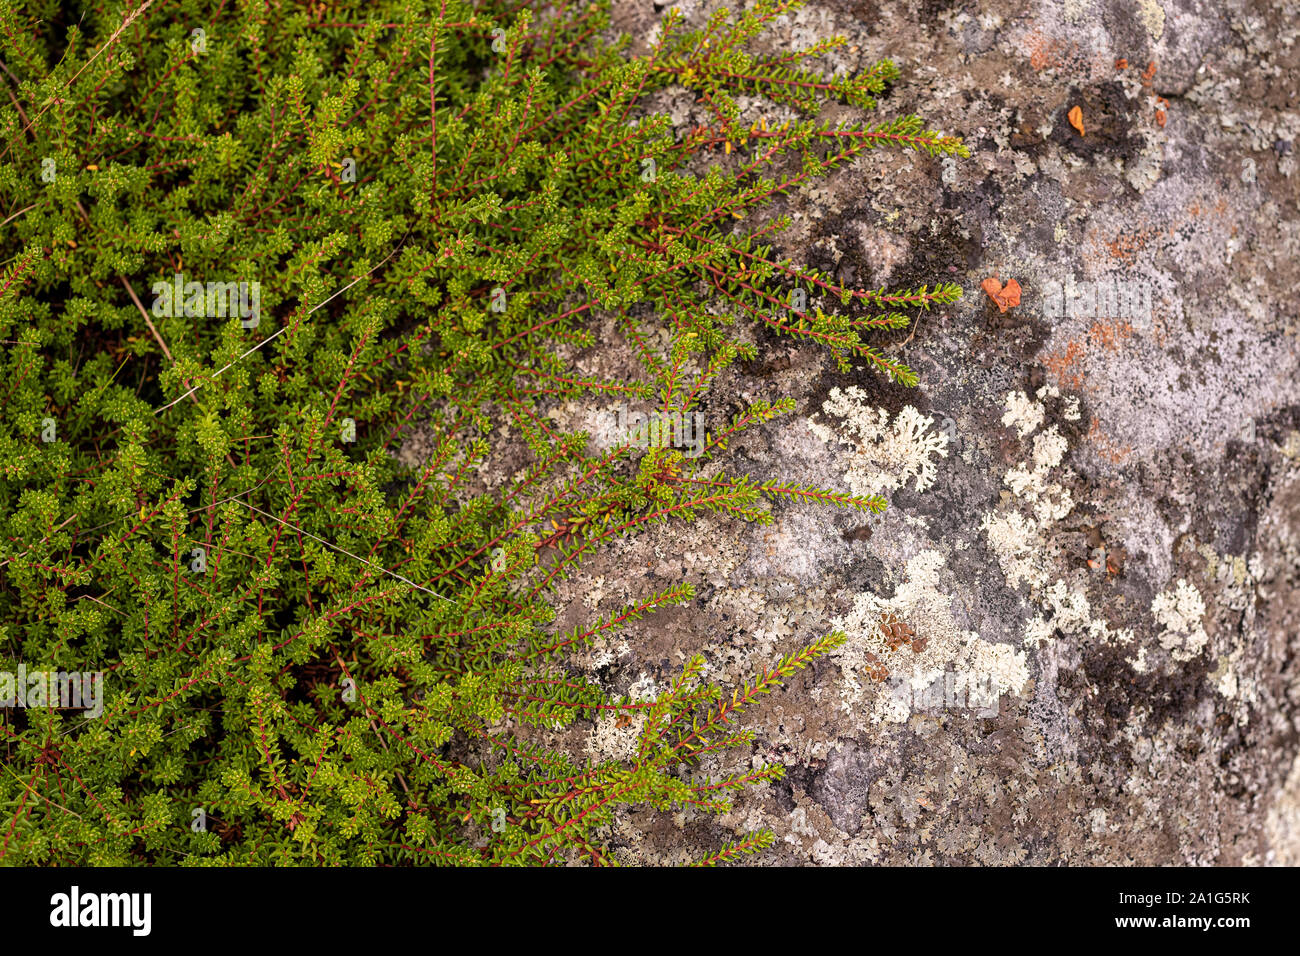 Green clambering plant on a gray stone surface. Close-up view. Natural background Stock Photo